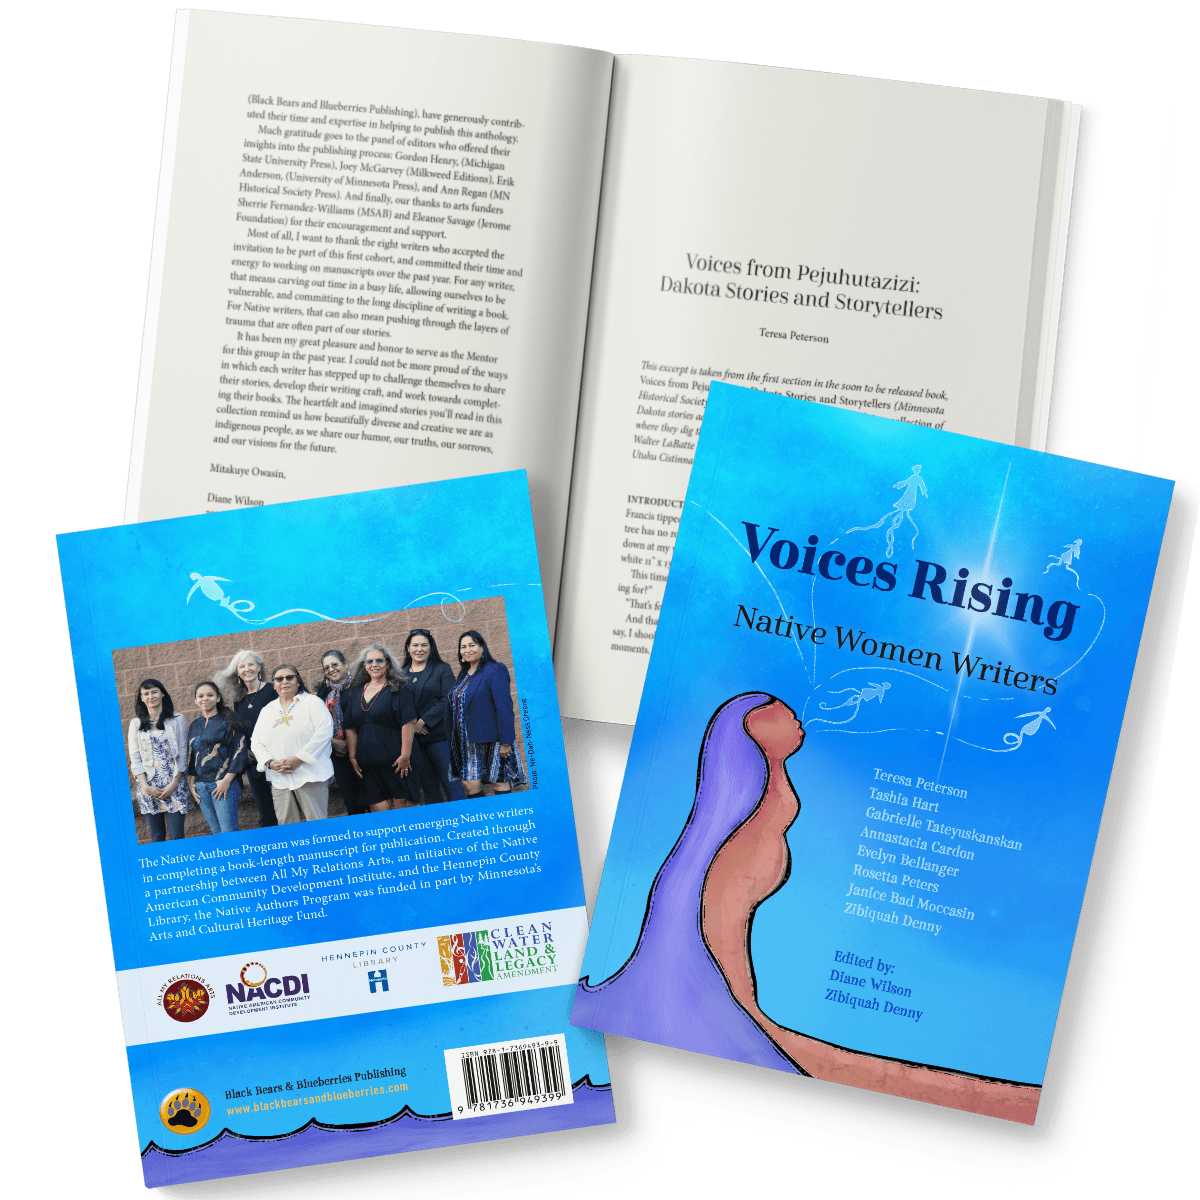 Voices Rising showing front and back covers, and an interior spread